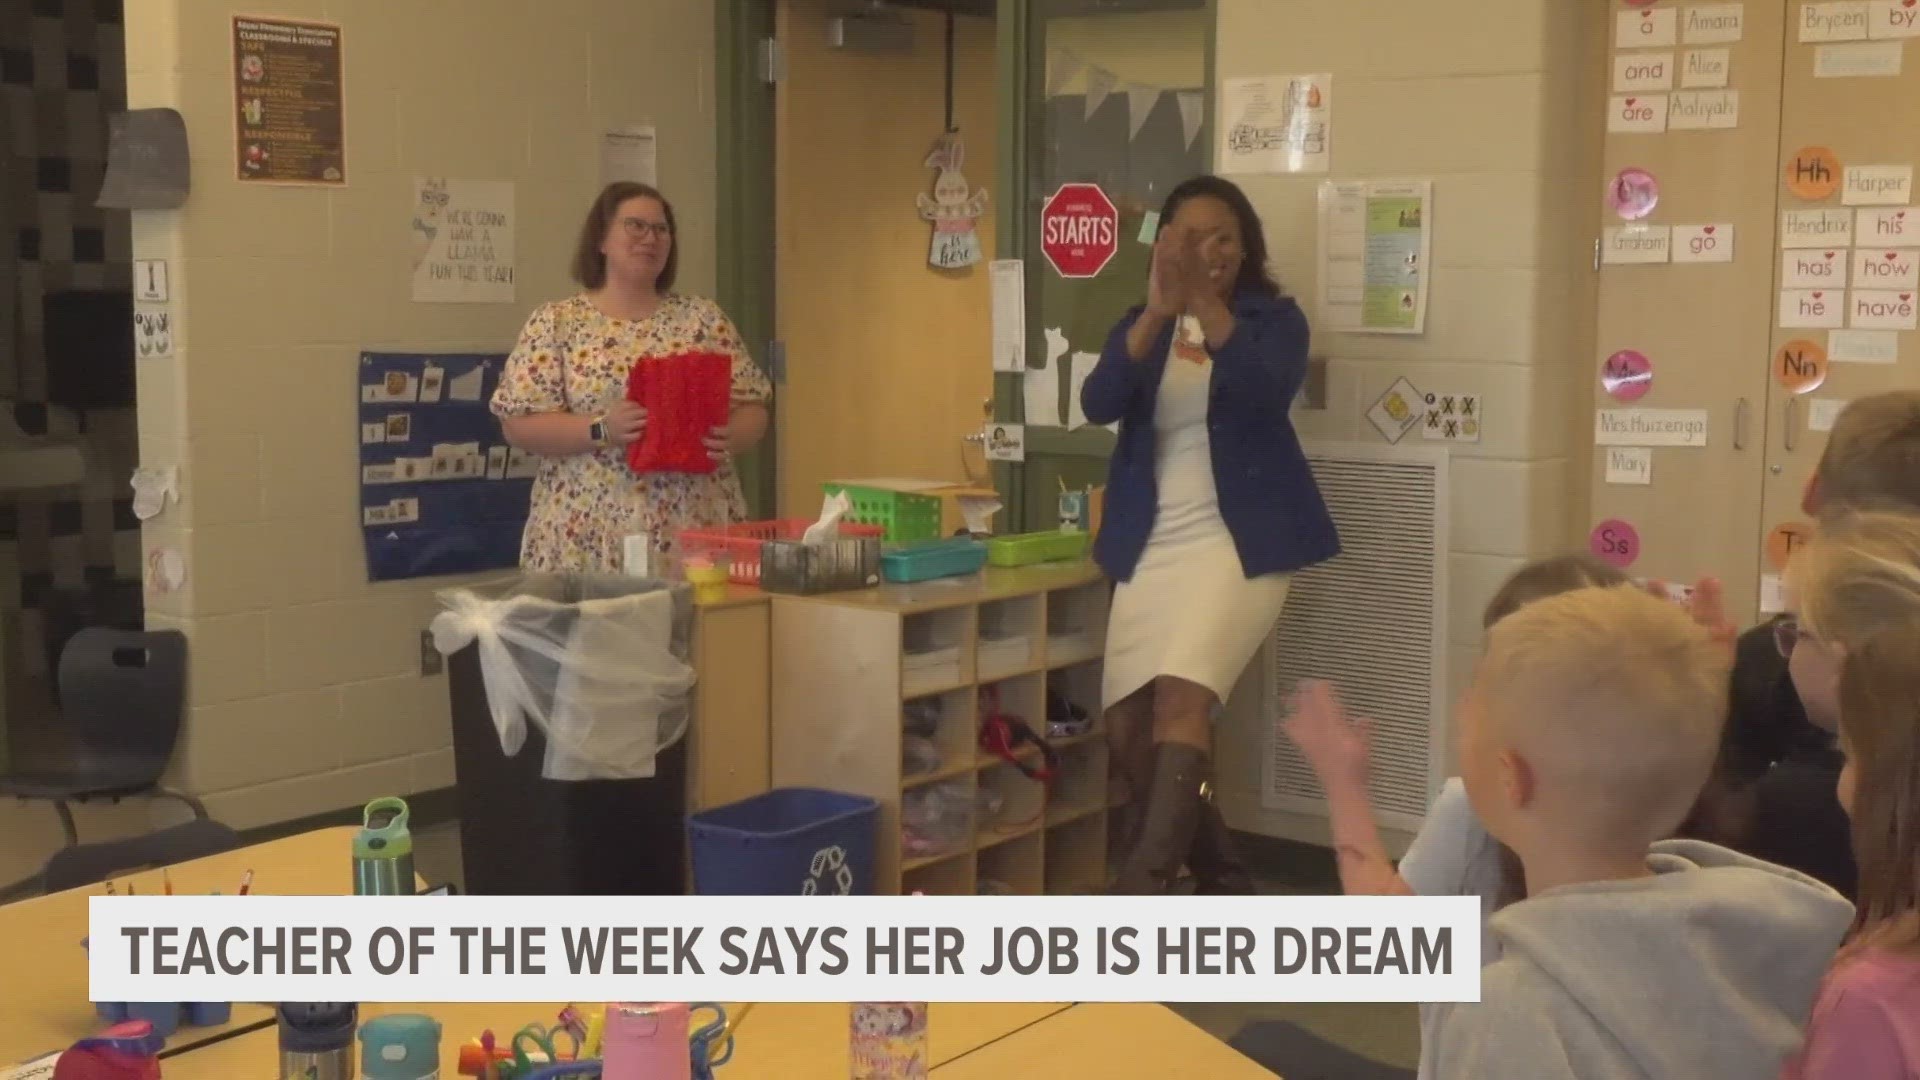 "That just confirms that this is my dream job, that I'm living my dream," Linsey Huizenga, Adams Elementary School Teacher said.